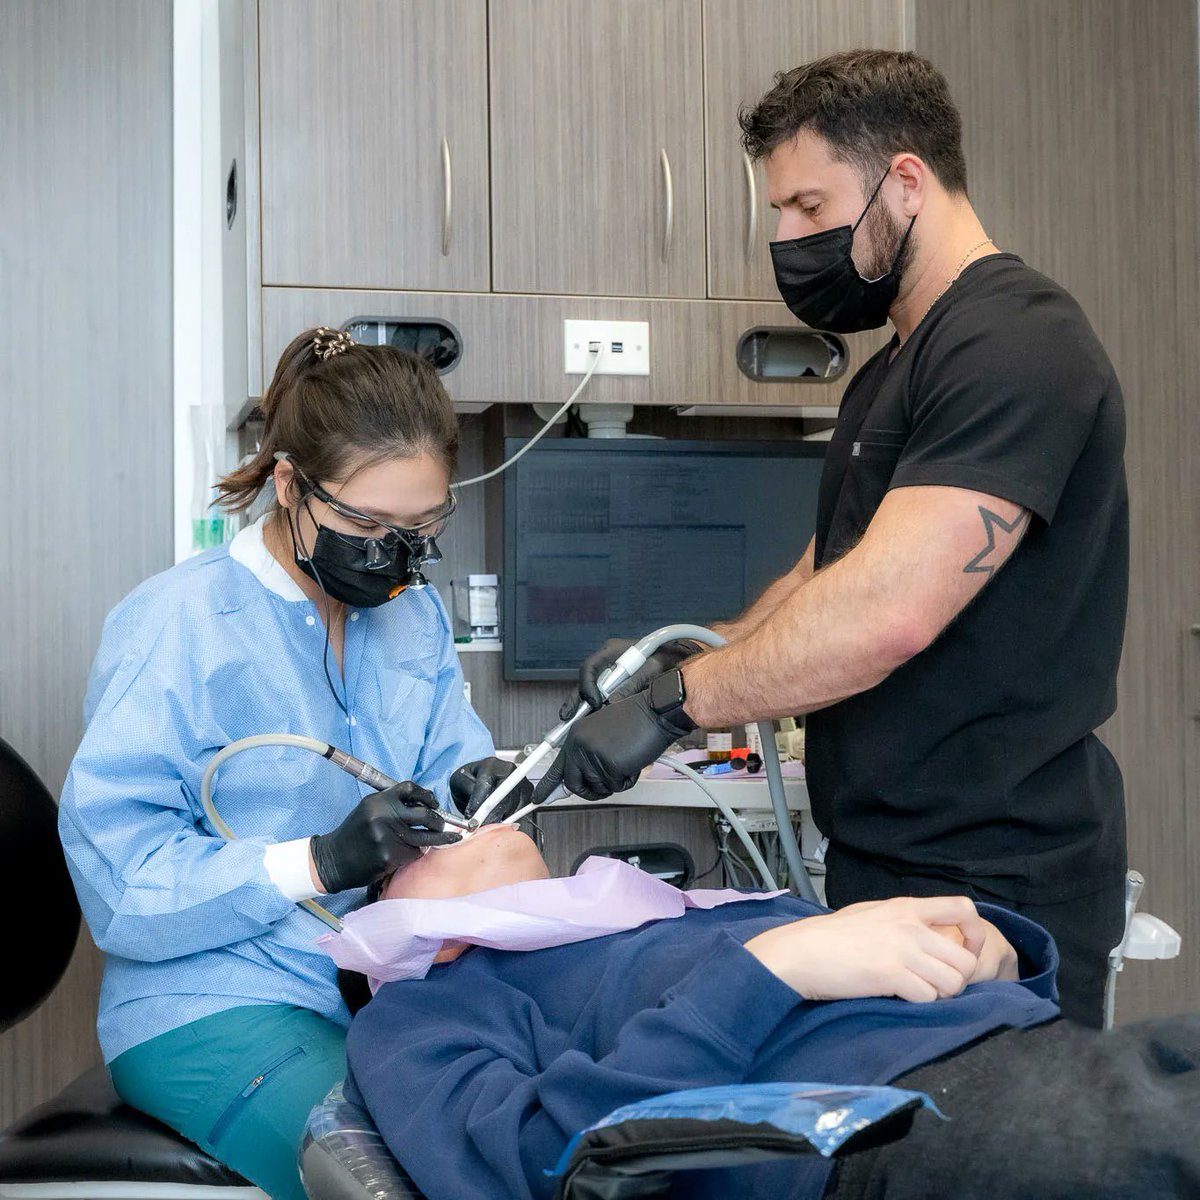 🦷 Experience the magic of cosmetic dentistry in action at URBN Dental!

#urbndental #dentistry #cosmeticdentistry #oralhygiene #houstondentists #houstontx #dentalassistant #dentalhygienist #dentaltips #dentistslife #dentalemergency #dentaltreatments #dentalcare